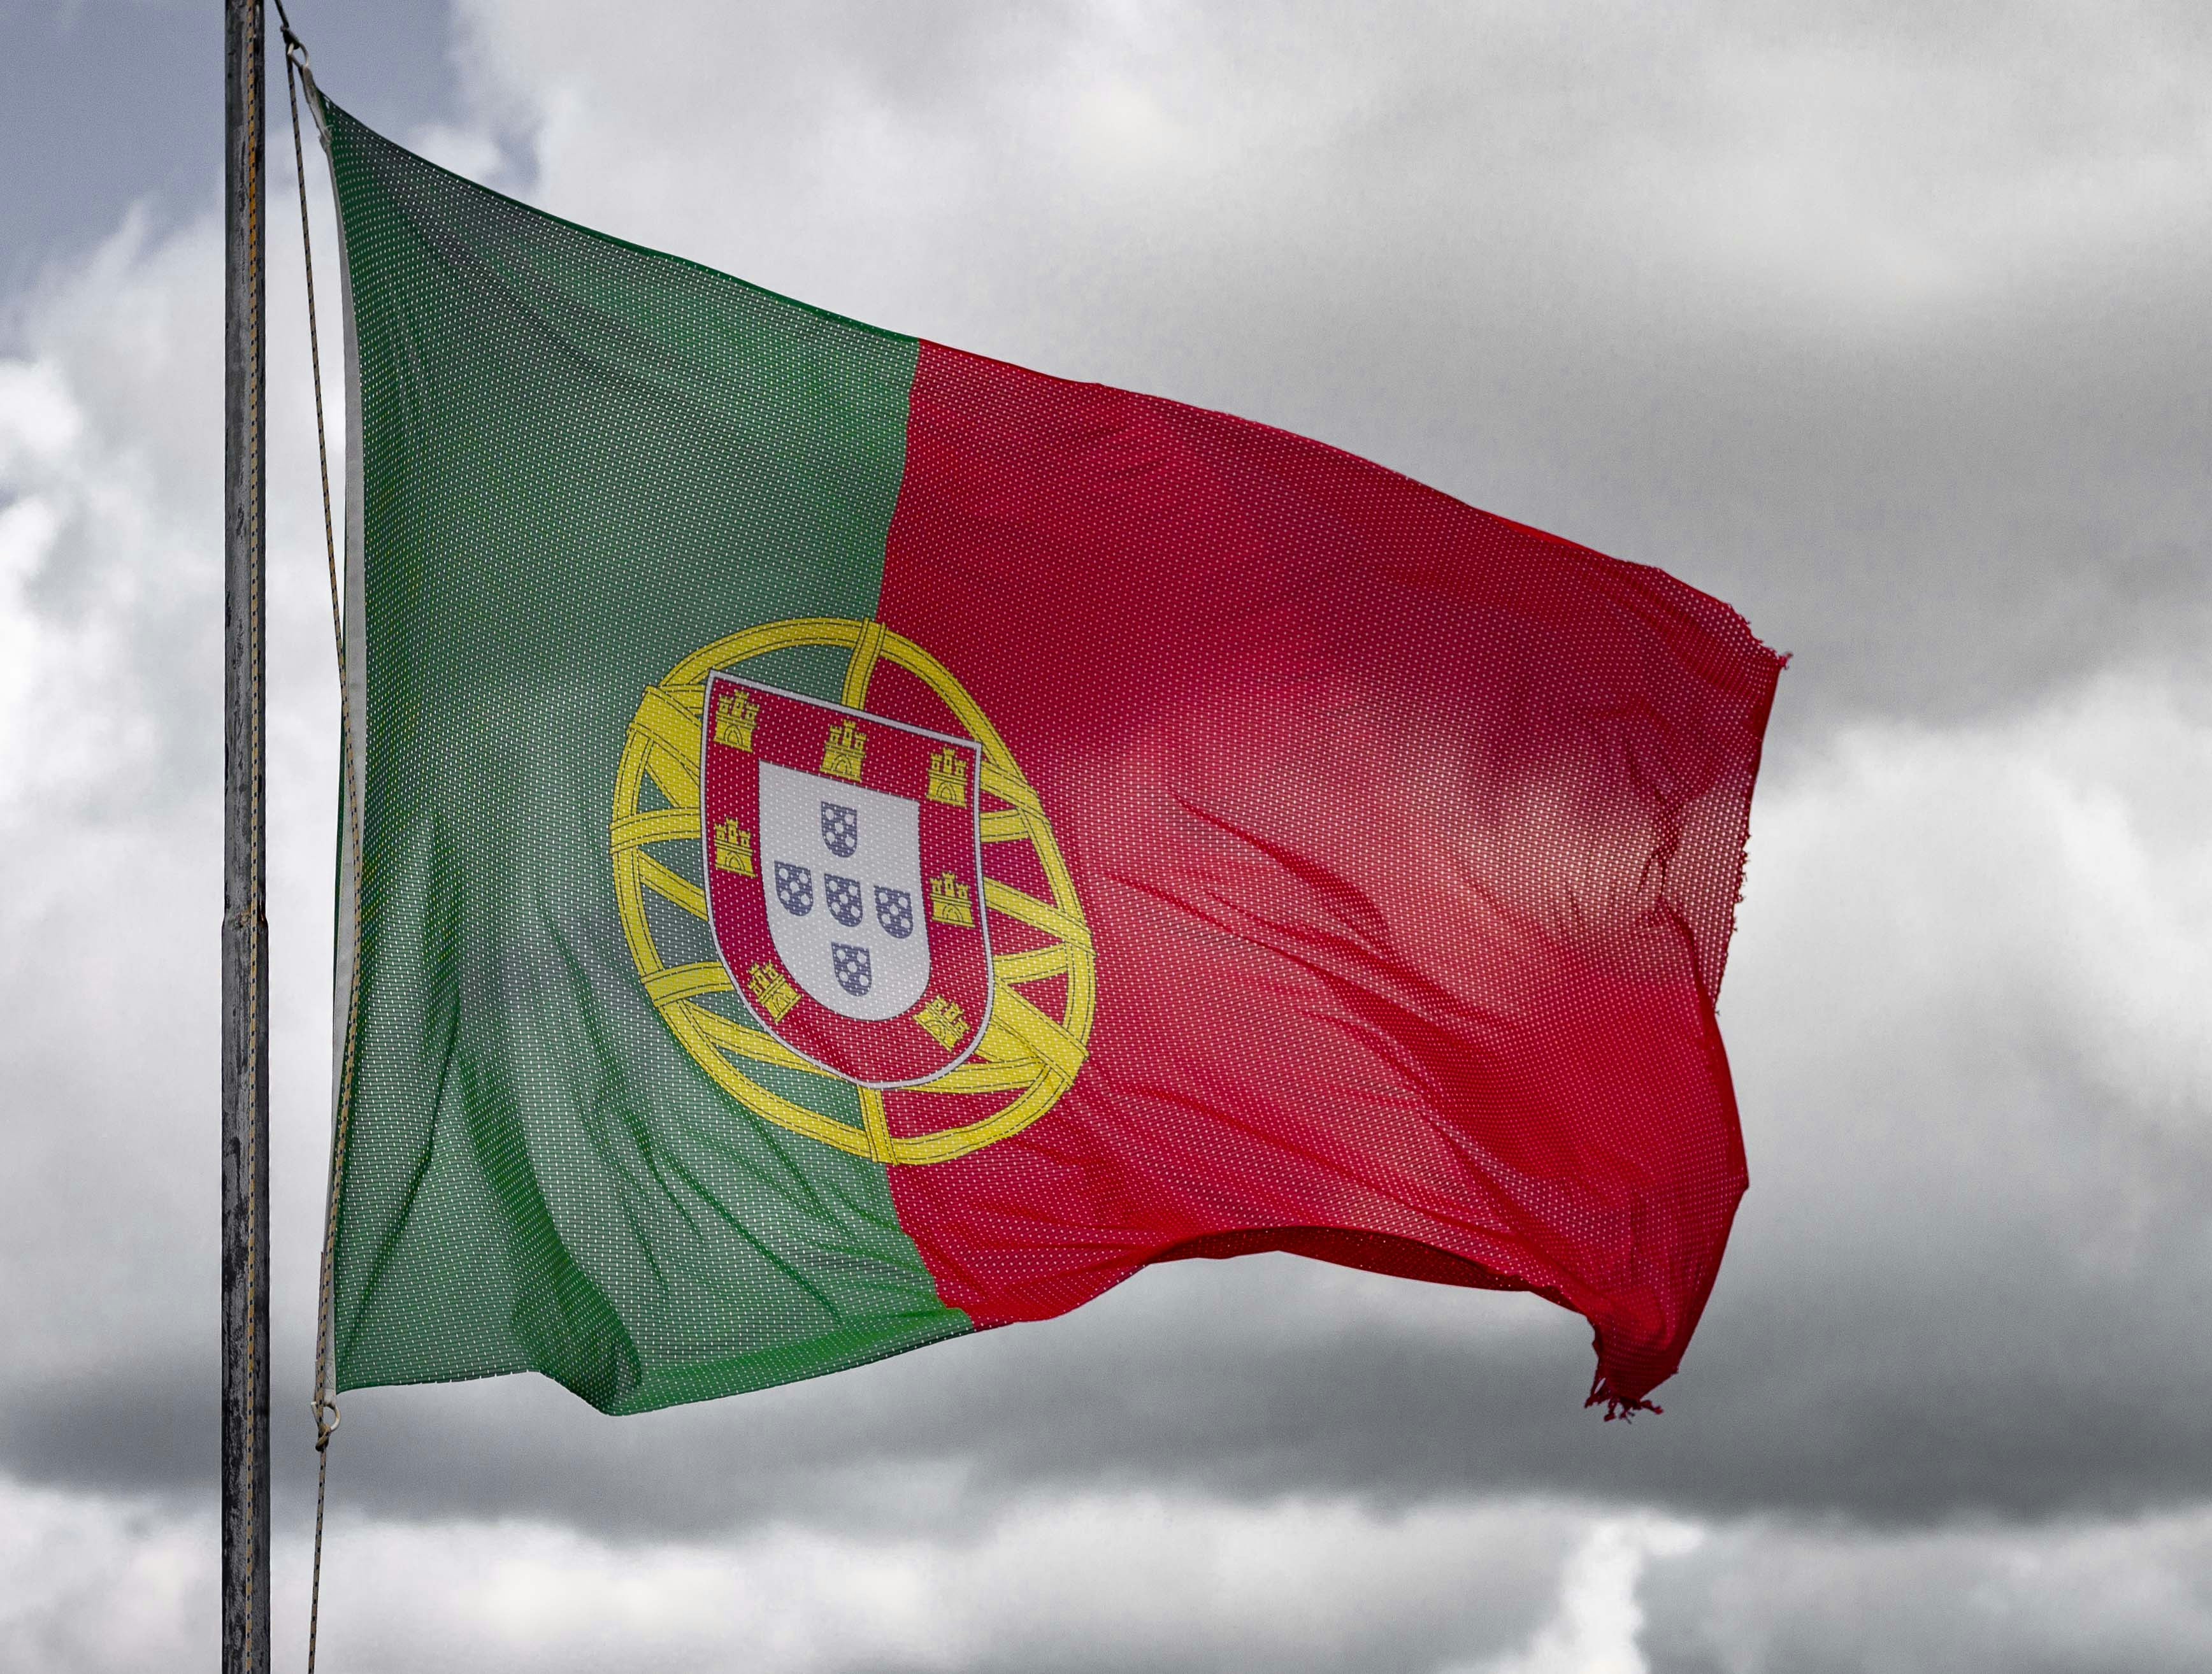 Image of Portugal's flag